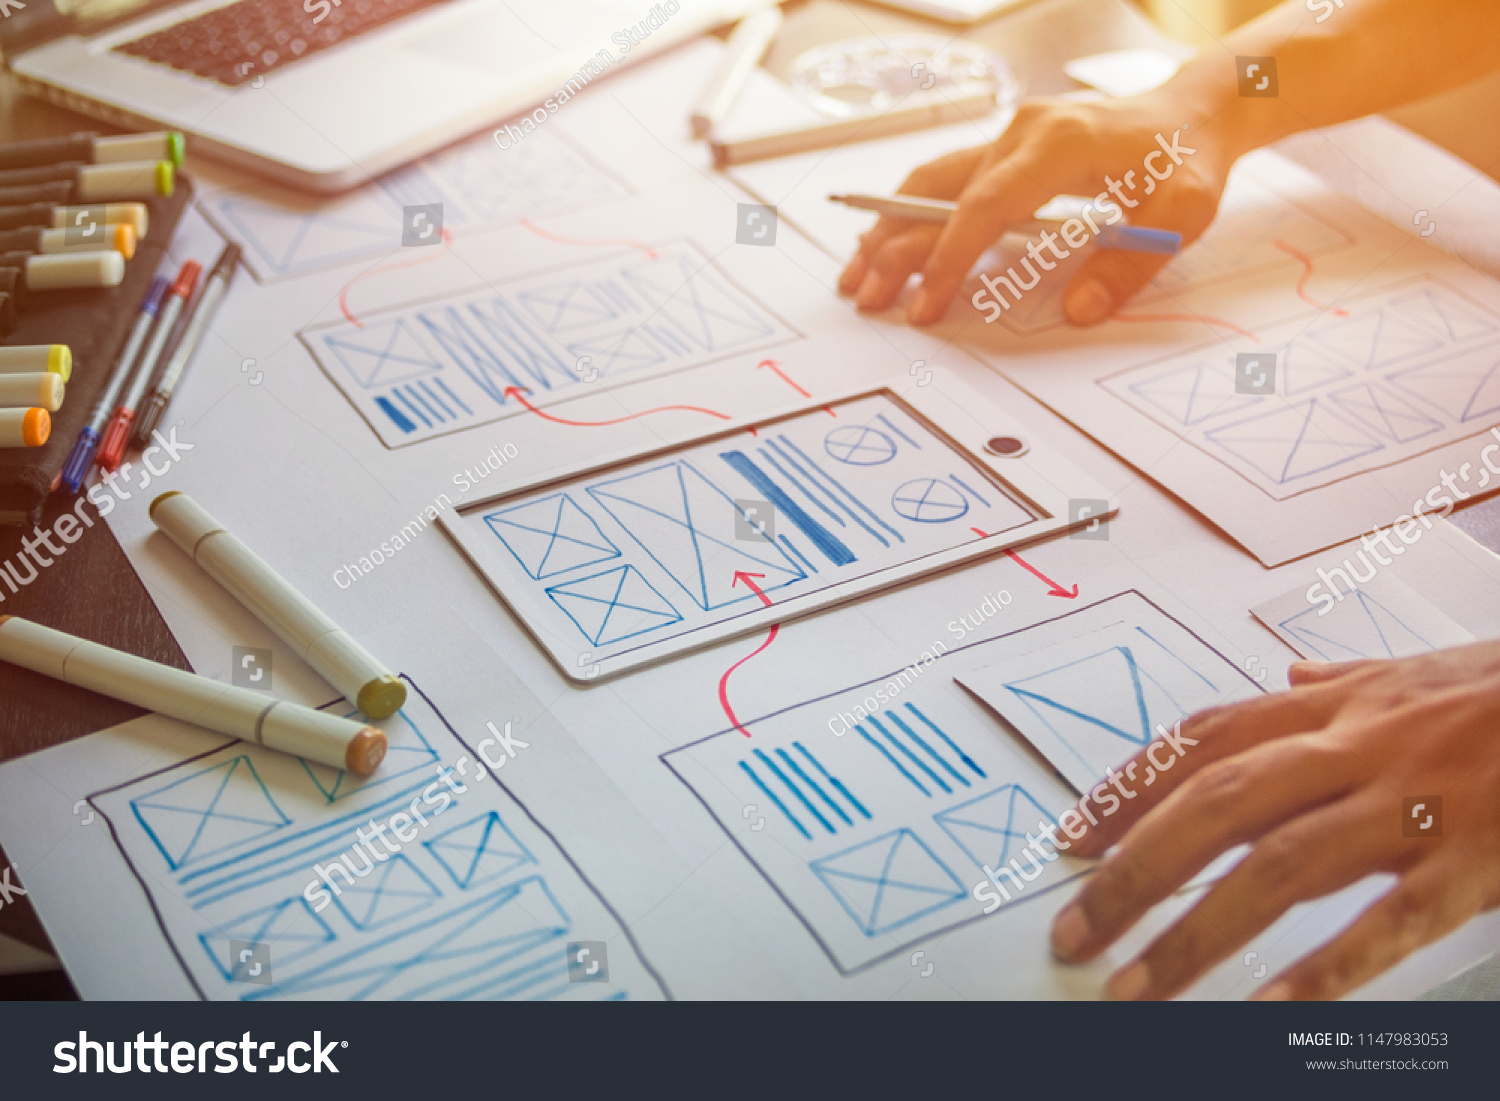 ux Graphic designer creative  sketch planning application process development prototype wireframe for web mobile phone . User experience concept. #1147983053